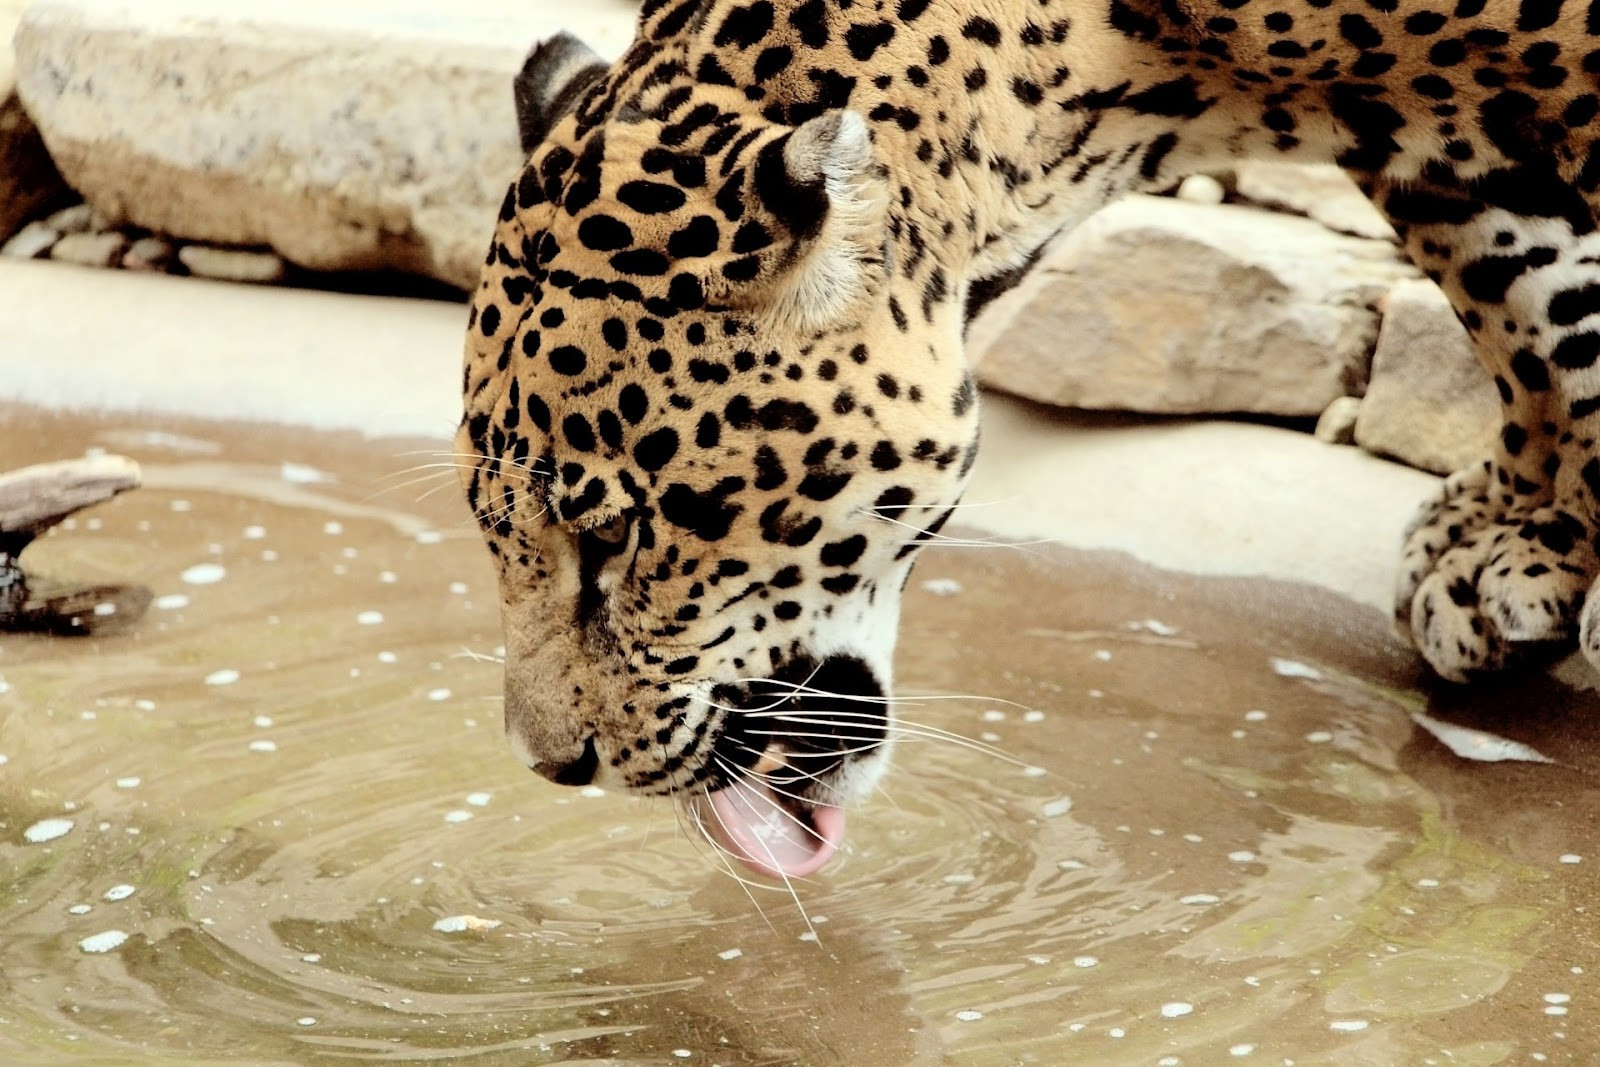 Fun Facts about Jaguars